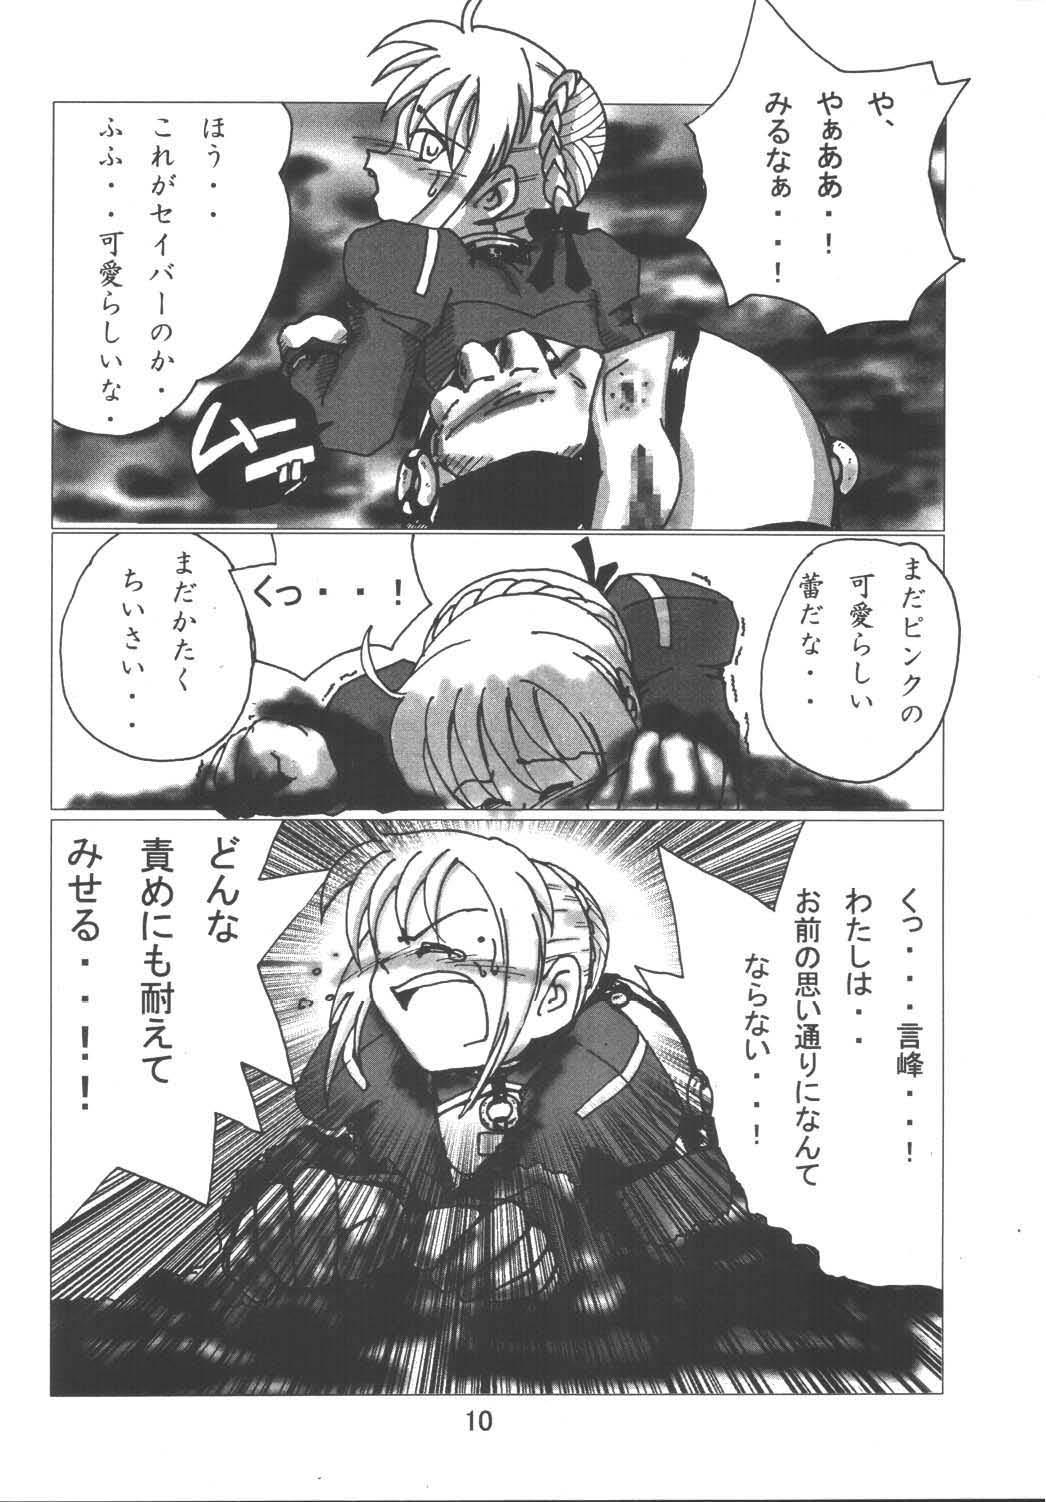 Phat Ass Fate Nightmare For Saber - Fate stay night Two - Page 10